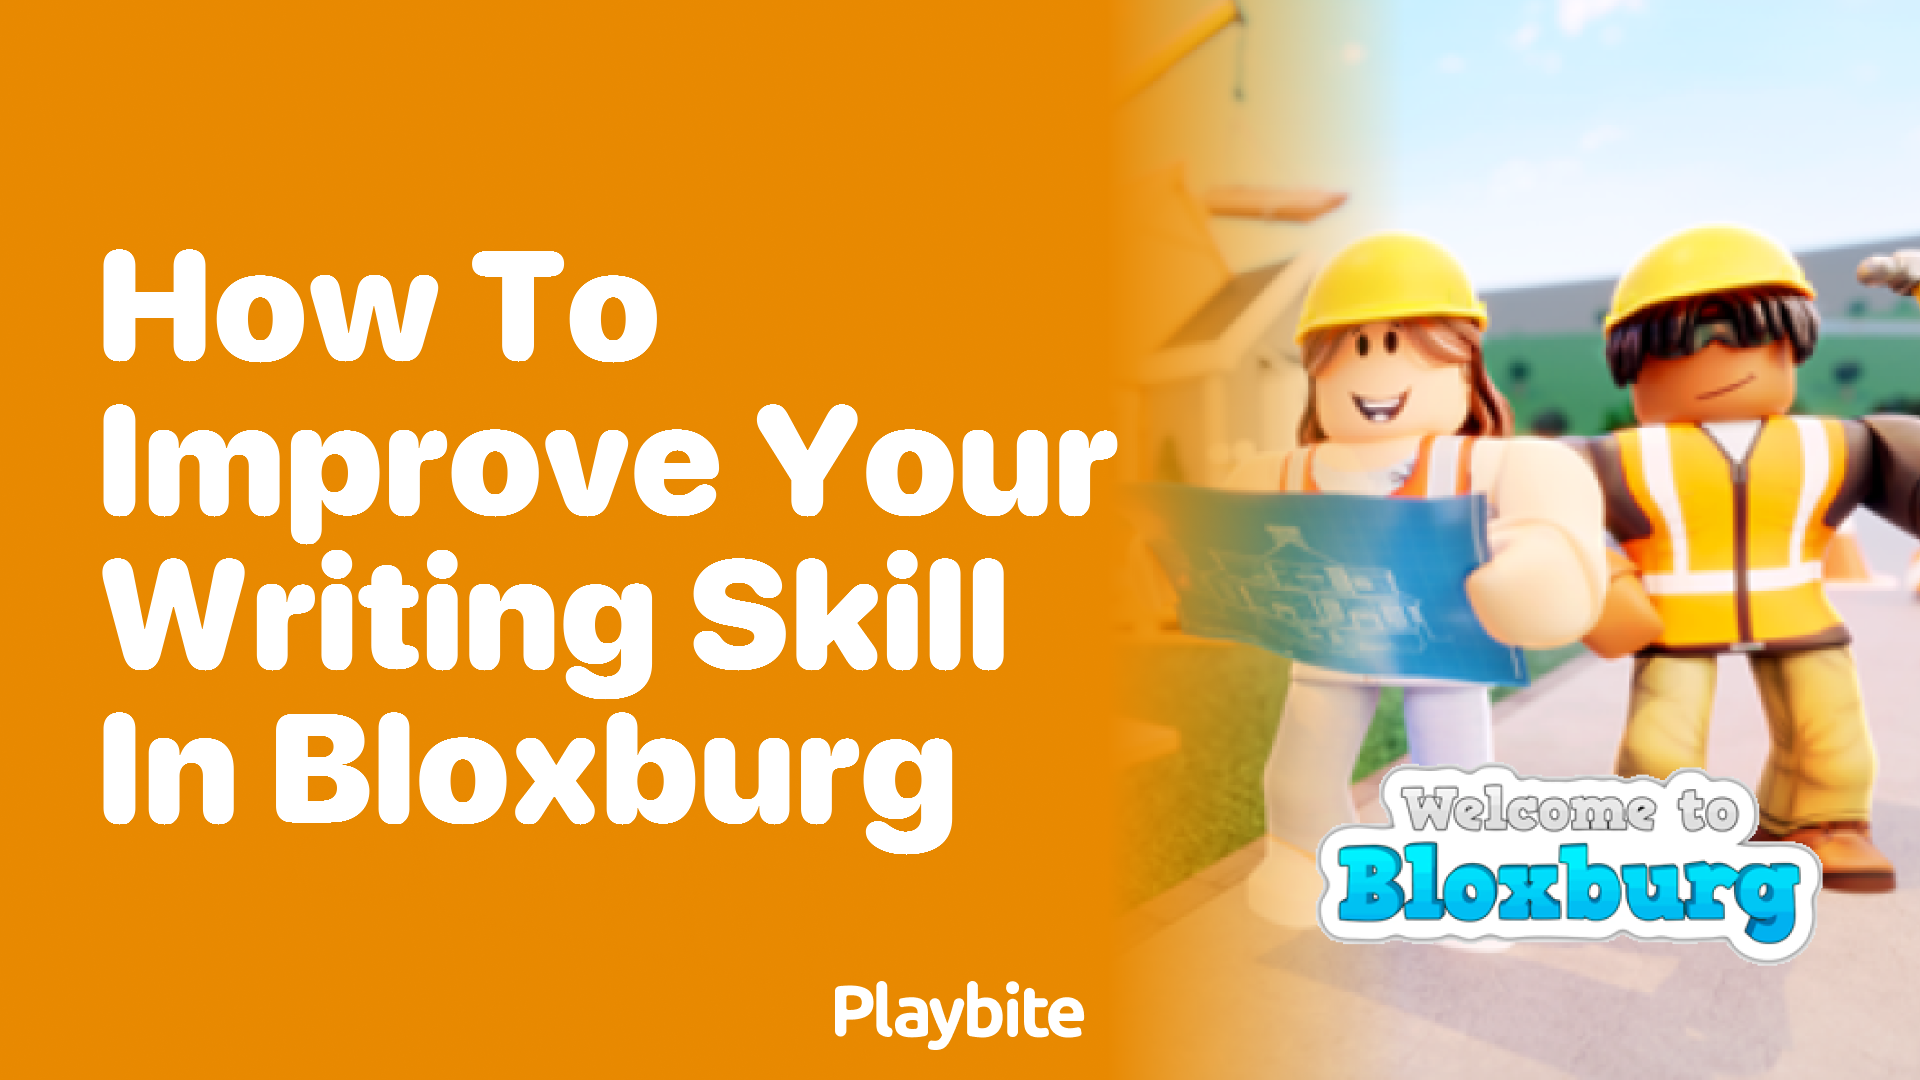 How to Improve Your Writing Skill in Bloxburg